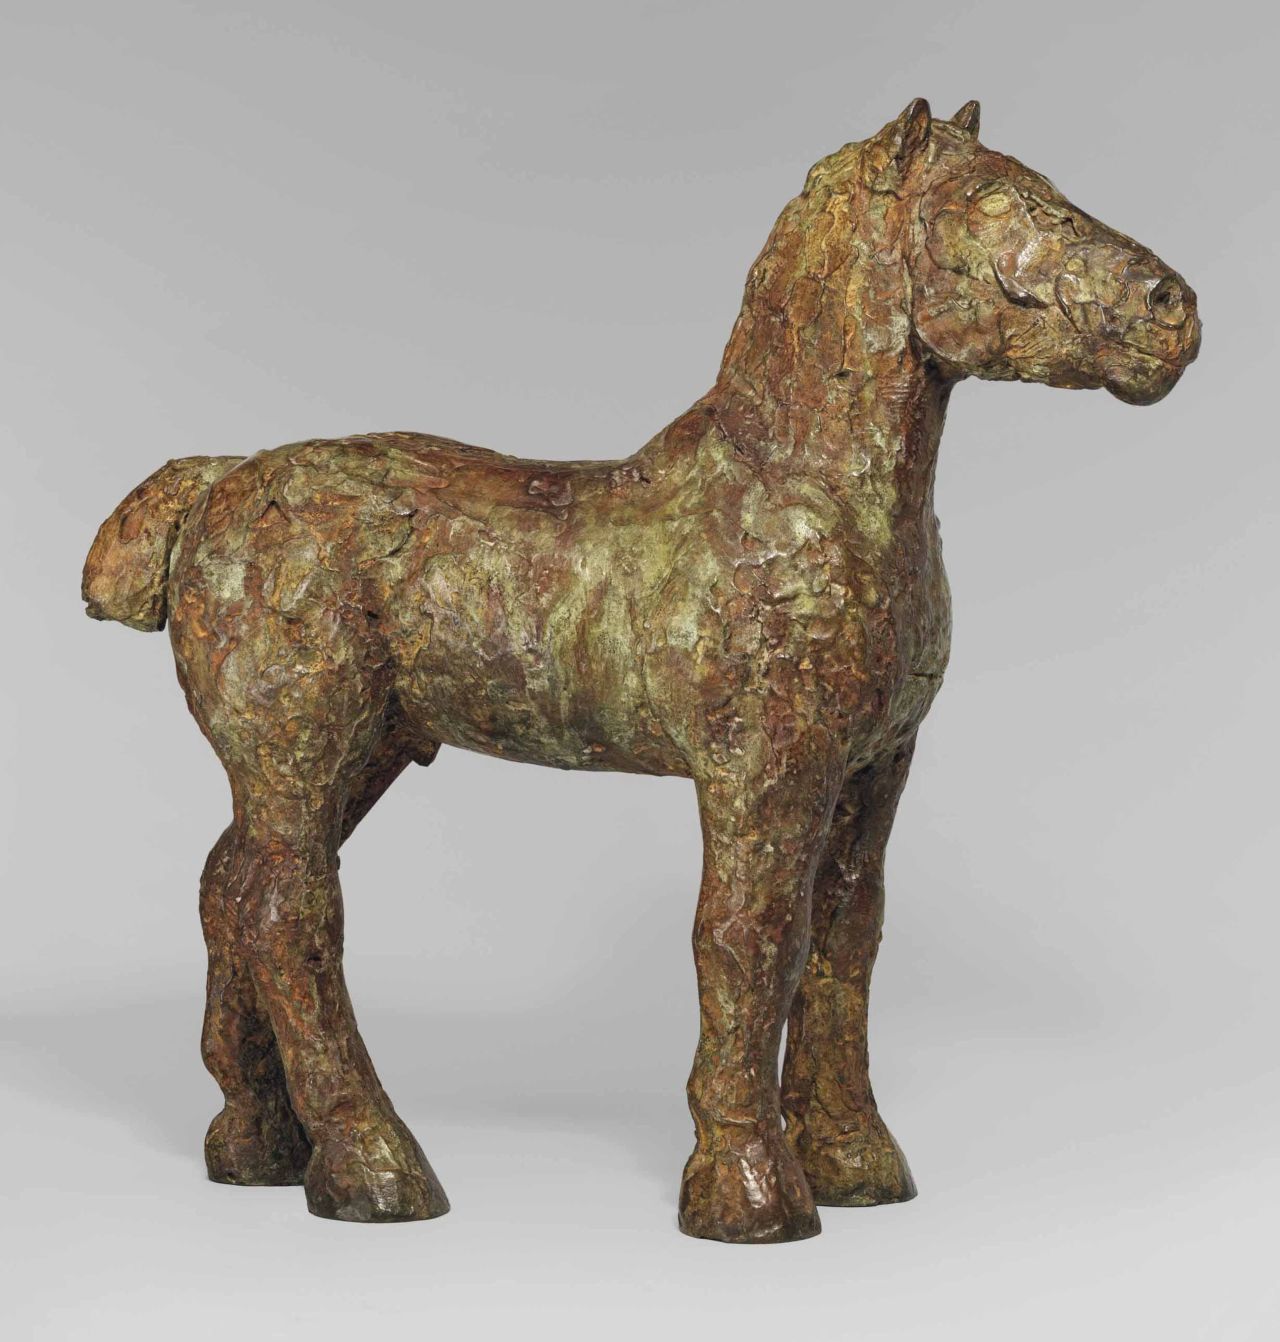 This statue created by Elisabeth Frink is estimated to be worth between $180,000-$270,000. The creation, 'First Horse' was made in 1990 and is 57.1cm long.